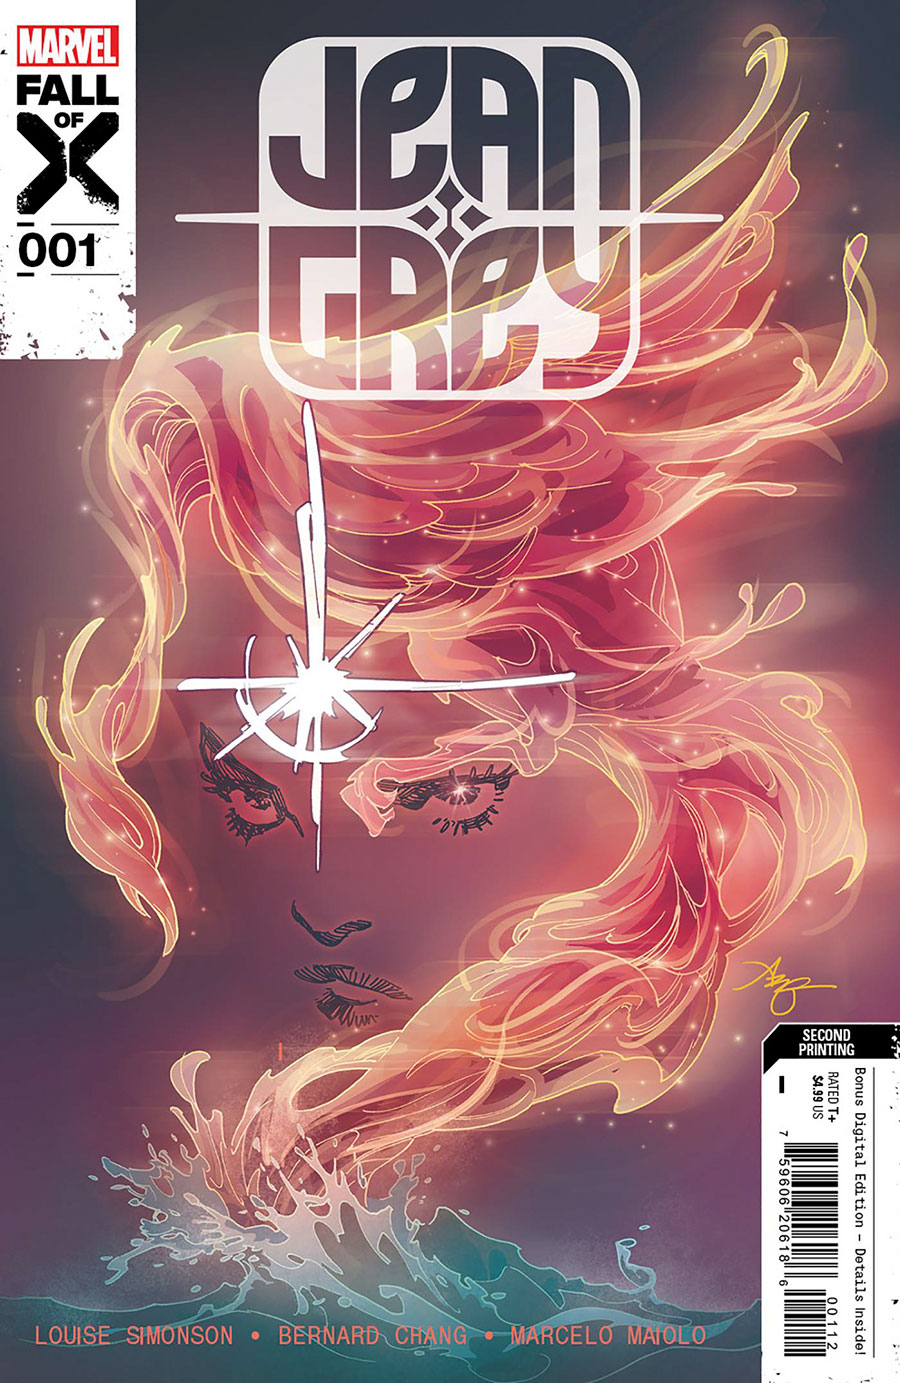 Jean Grey Vol 2 #1 Cover G 2nd Ptg Amy Reeder Variant Cover